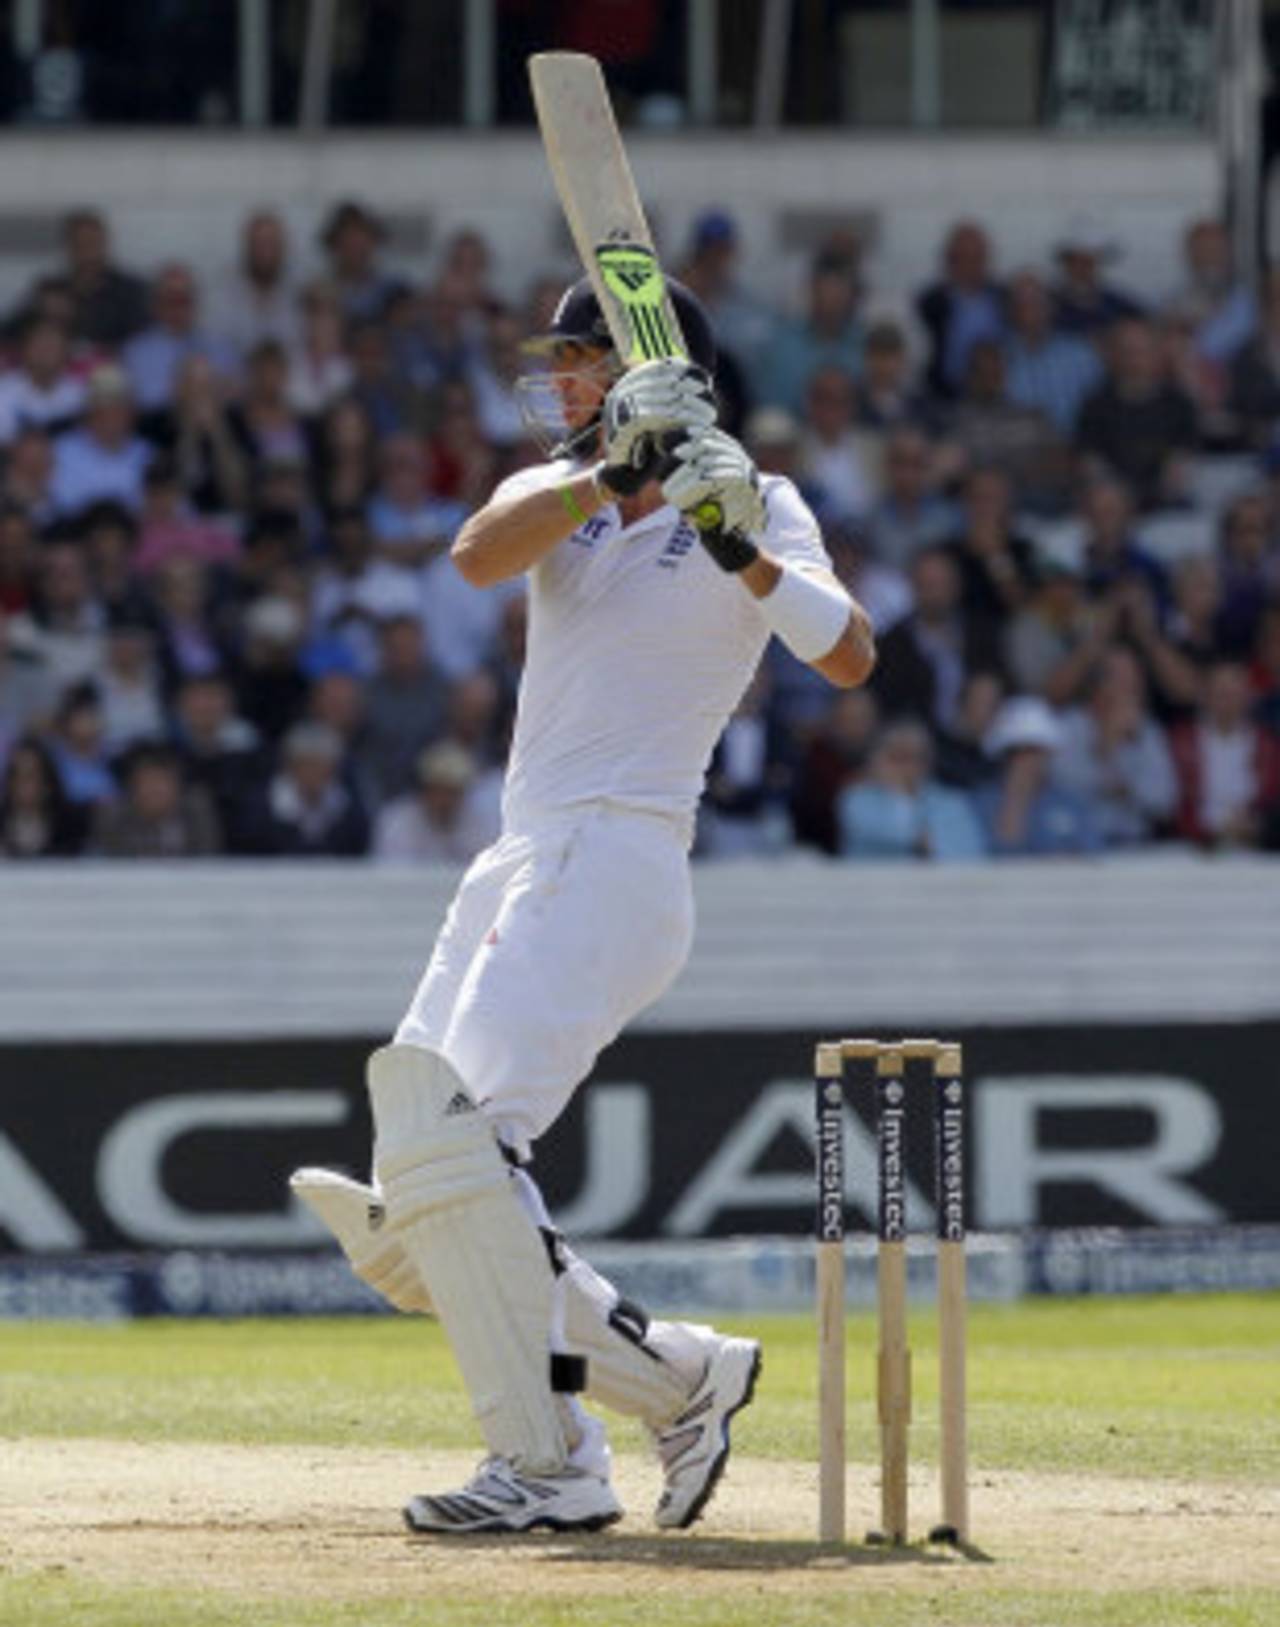 Kevin Pietersen pulls away an early boundary, England v South Africa, 2nd Investec Test, Headingley, 3rd day, August 4, 2012